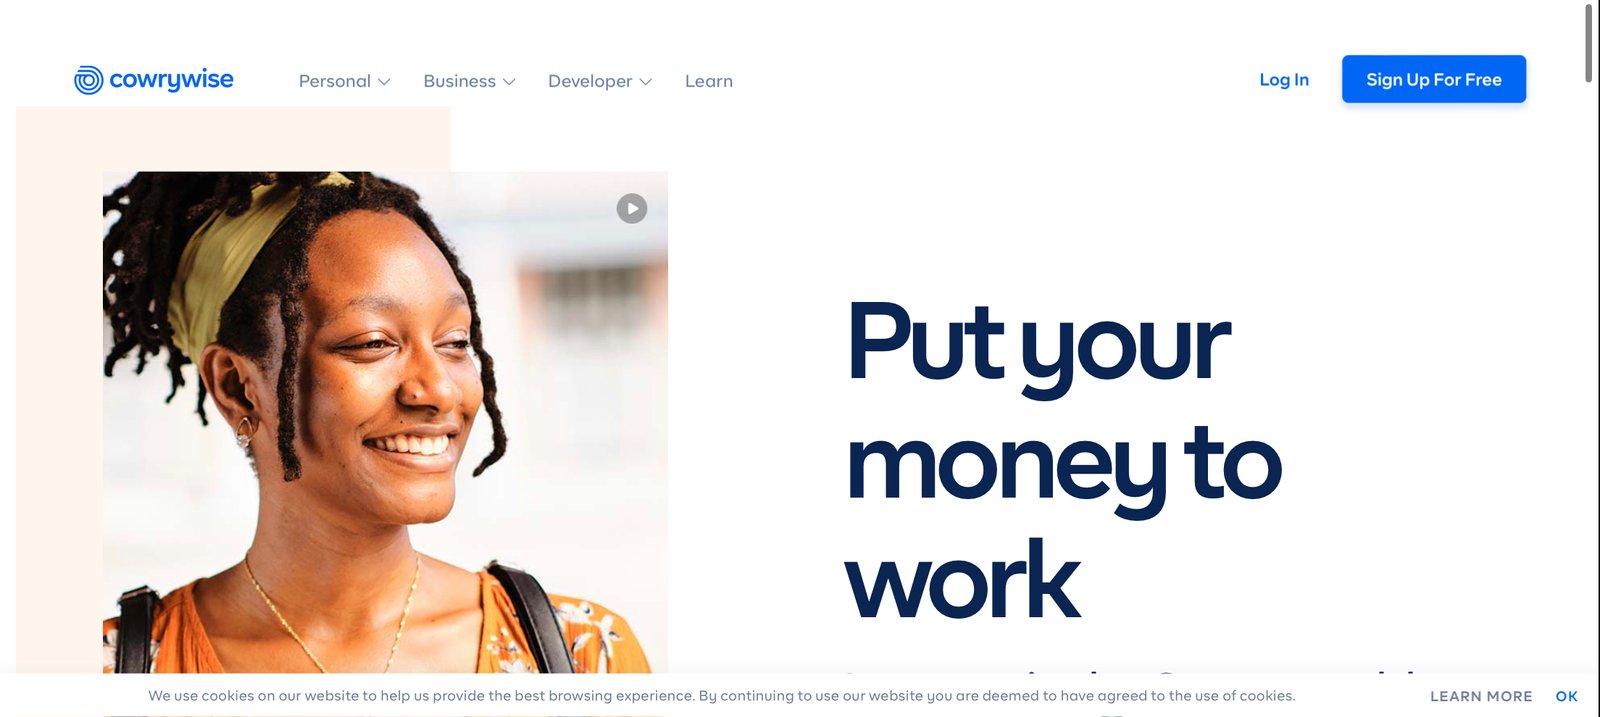 How to Withdraw My Money from Cowrywise Before Maturity Date